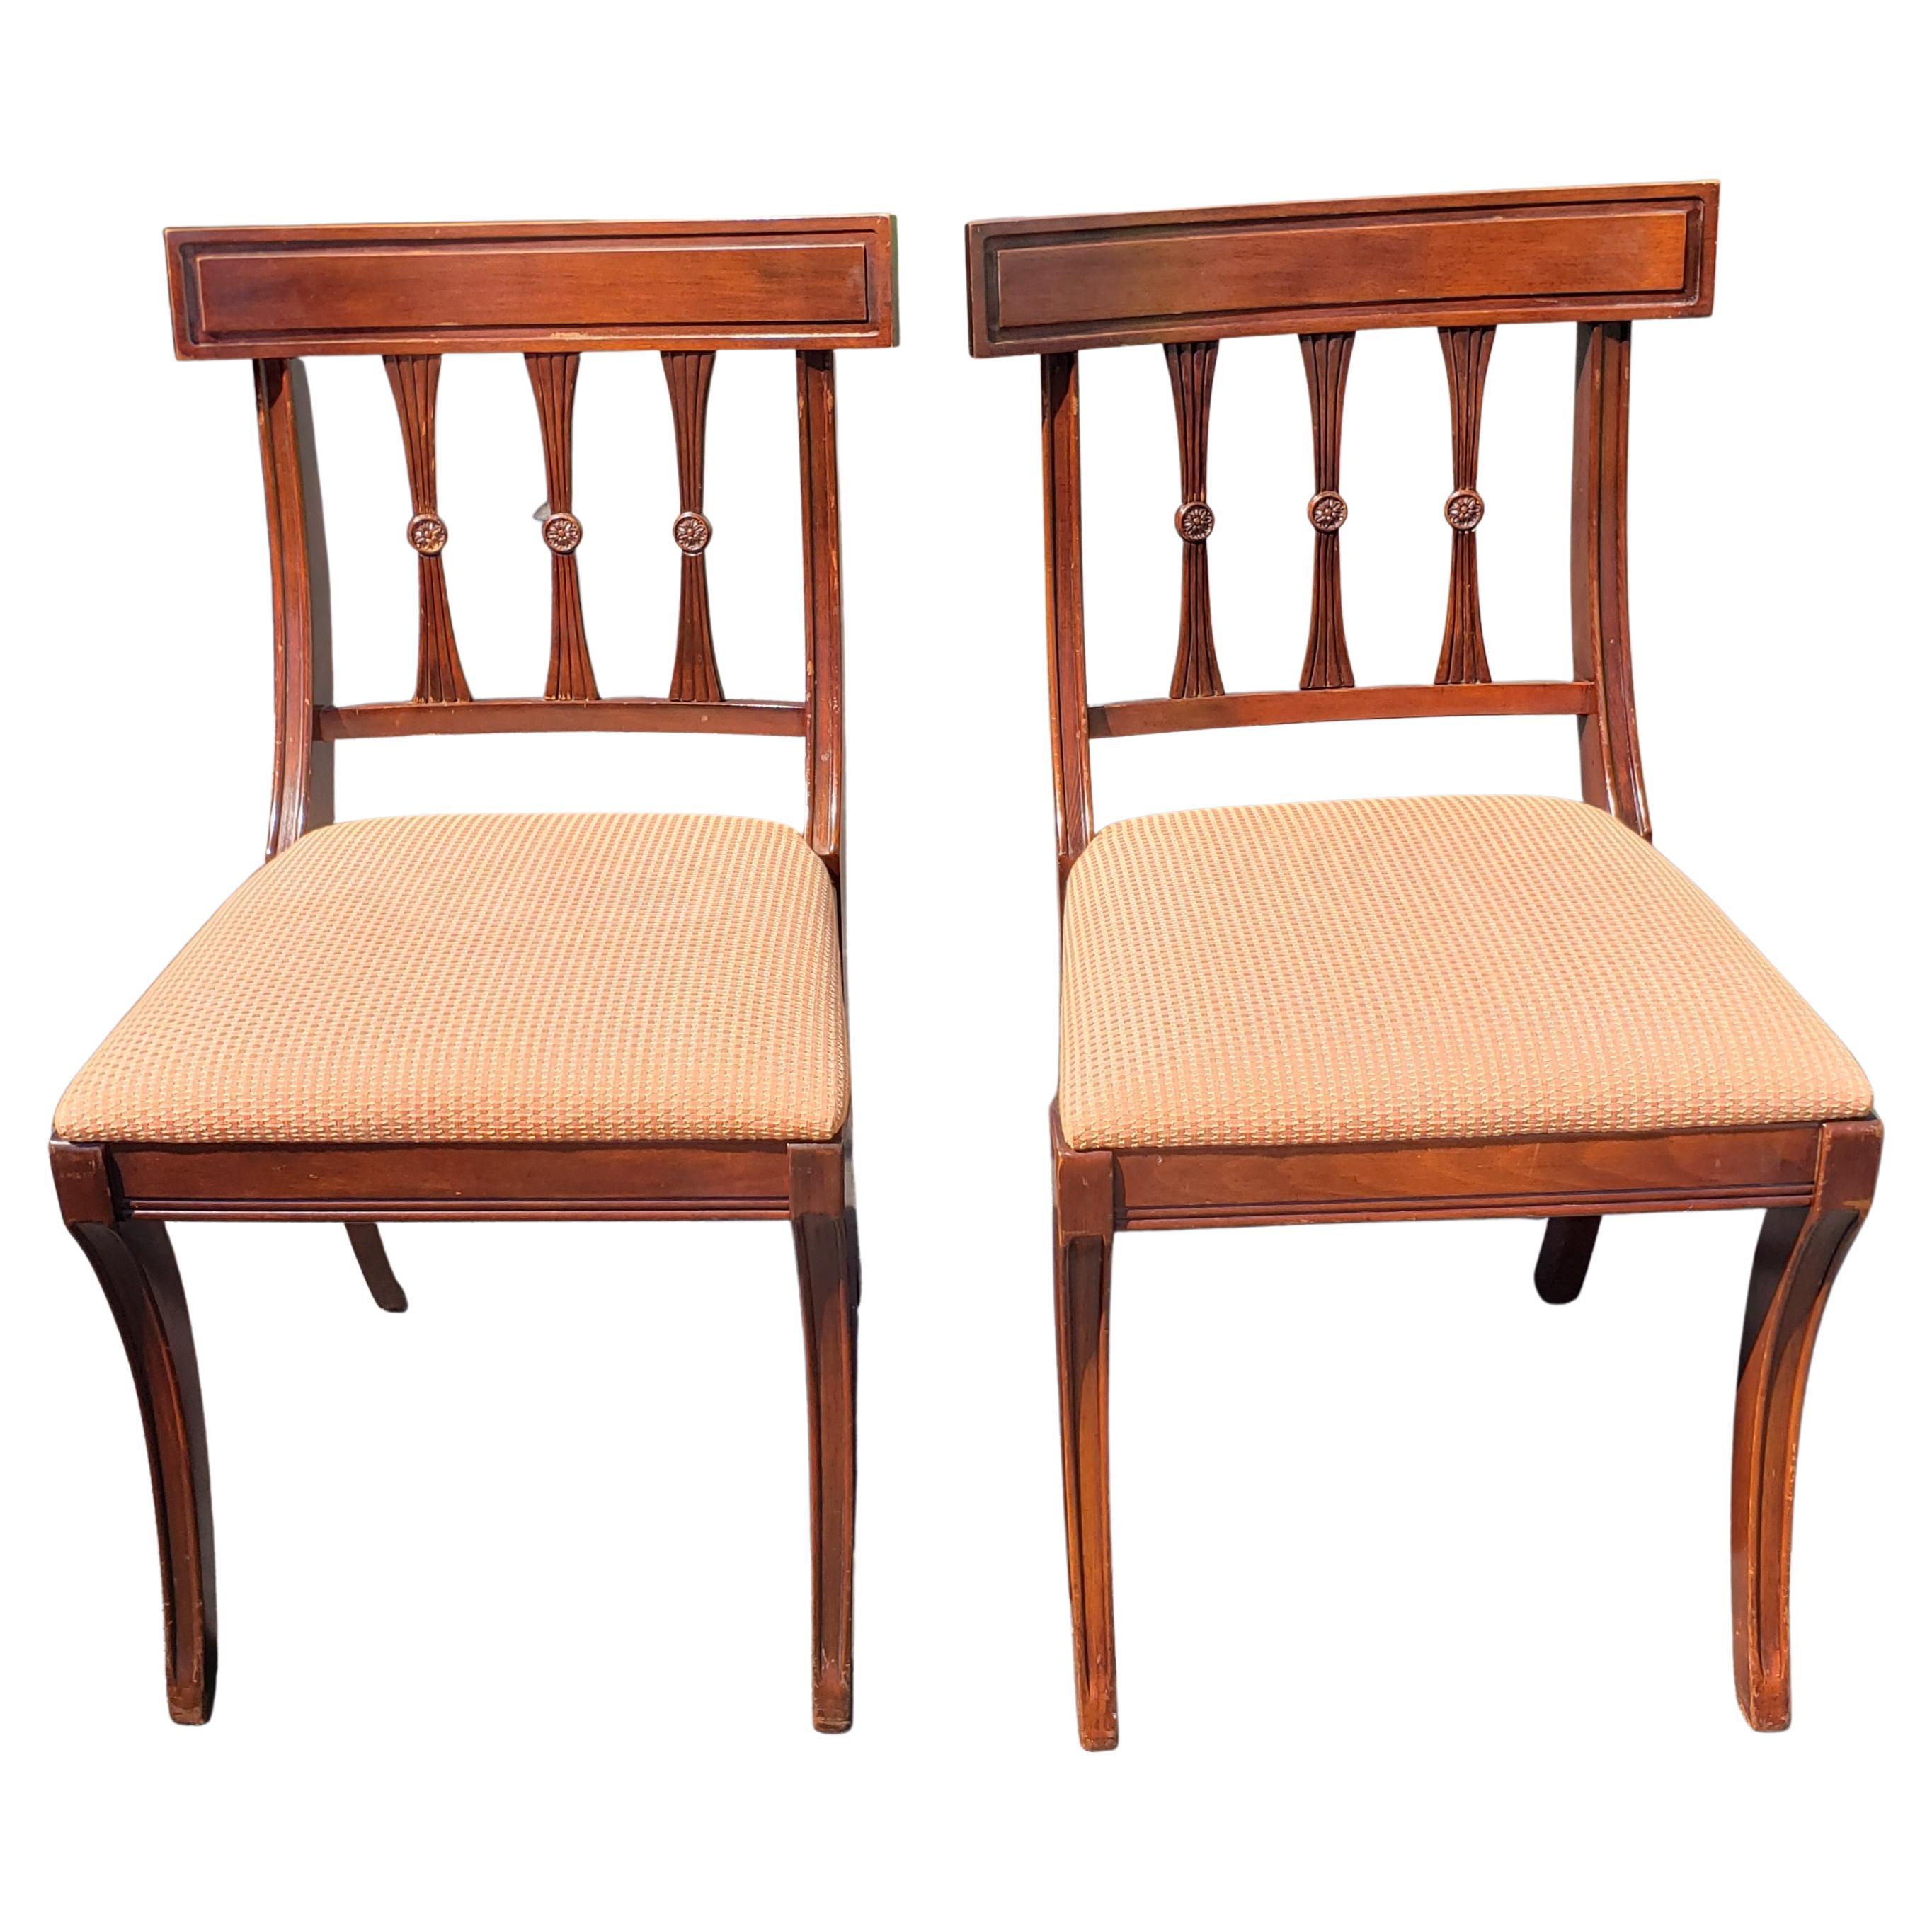 Beautiful pair of Duncan Phyfe Mahogany upholstered chairs Circa 1940s.
Good vintage condition. Where reupholstered. Please last 2 pictures for more close upholstery color.
Measure 17.5